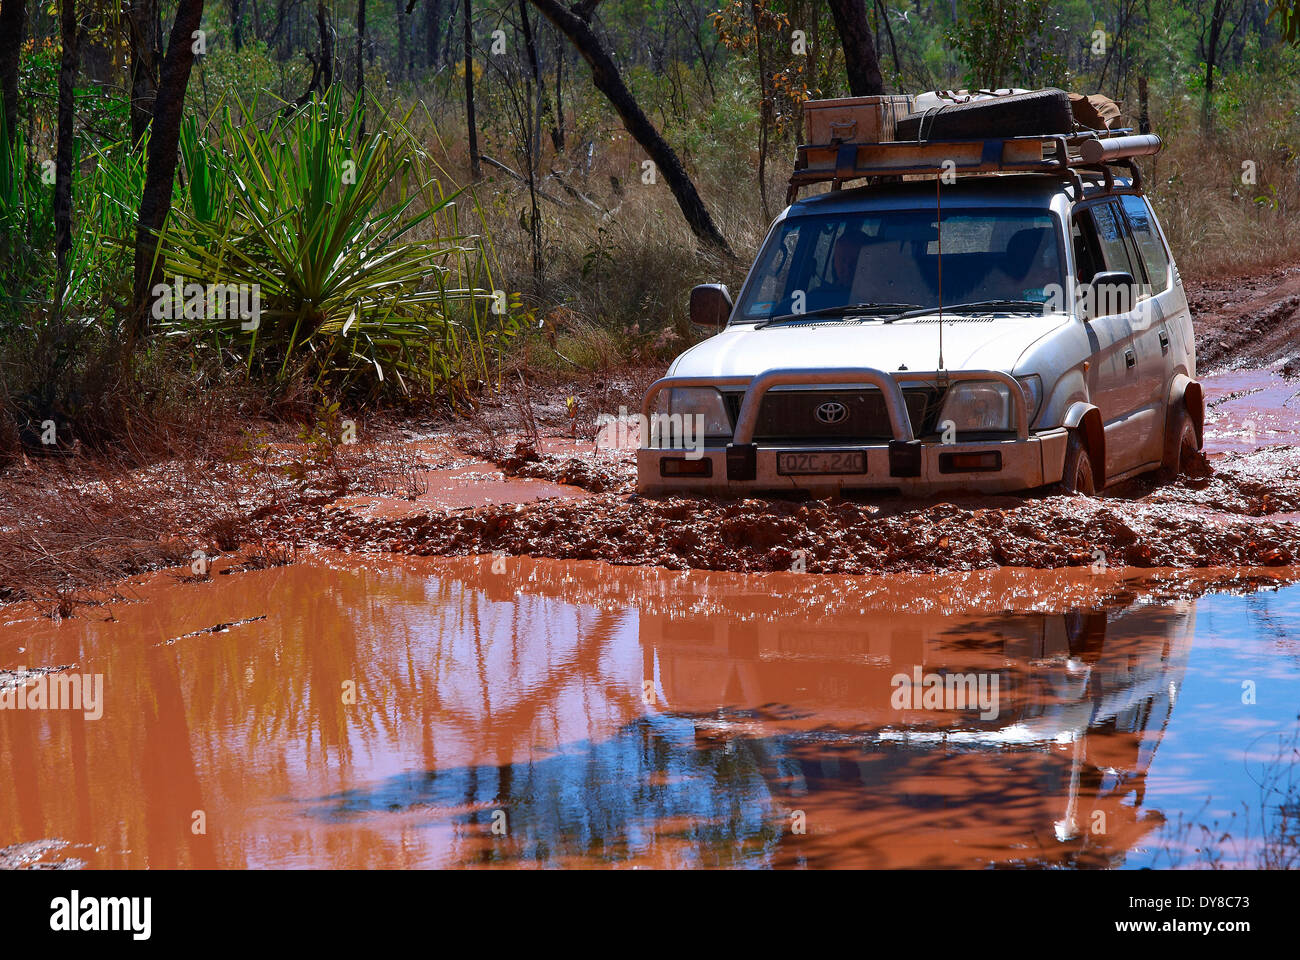 Australia, Northern Territory, Outback, Roper, Limmen, national park, cross country vehicle, mud, slime, track Stock Photo